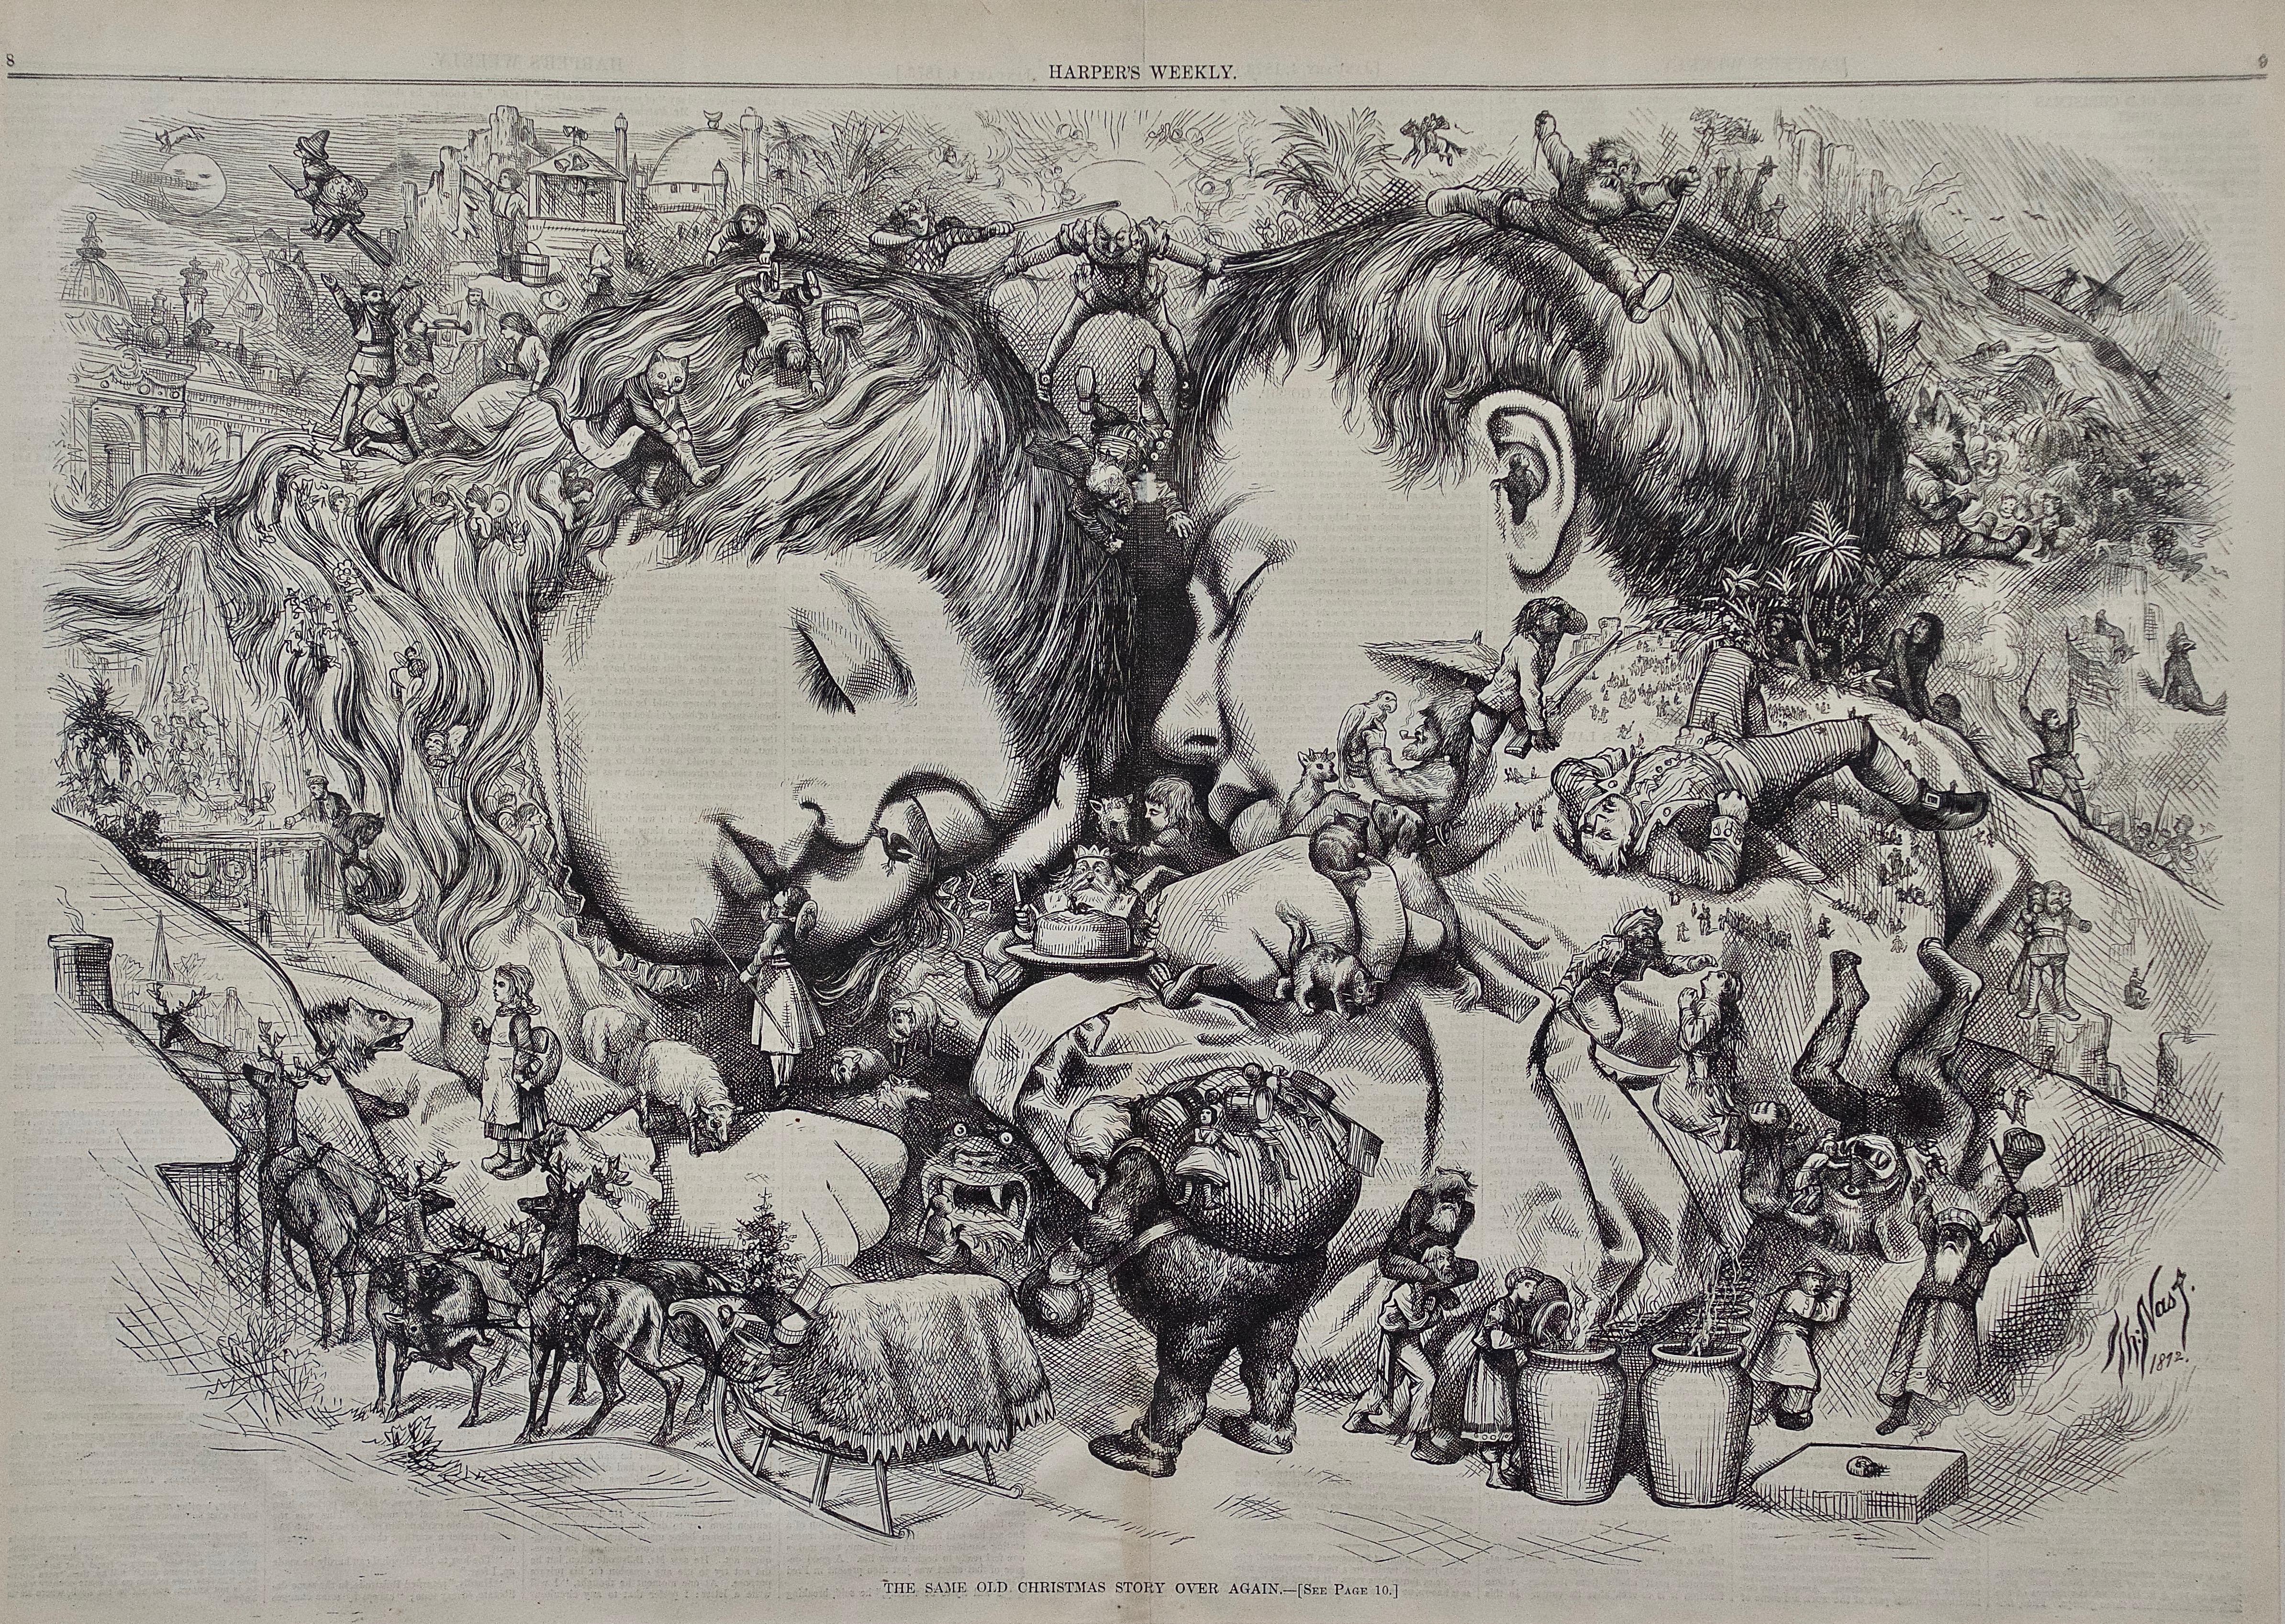 Thomas Nast's Christmas illustration “The Same Old Story Over Again” was published in Harper’s Weekly on January 4, 1873. The illustration shows two sleeping children, likely his own children, Thomas Jr. and Edith, dreaming of the childhood stories